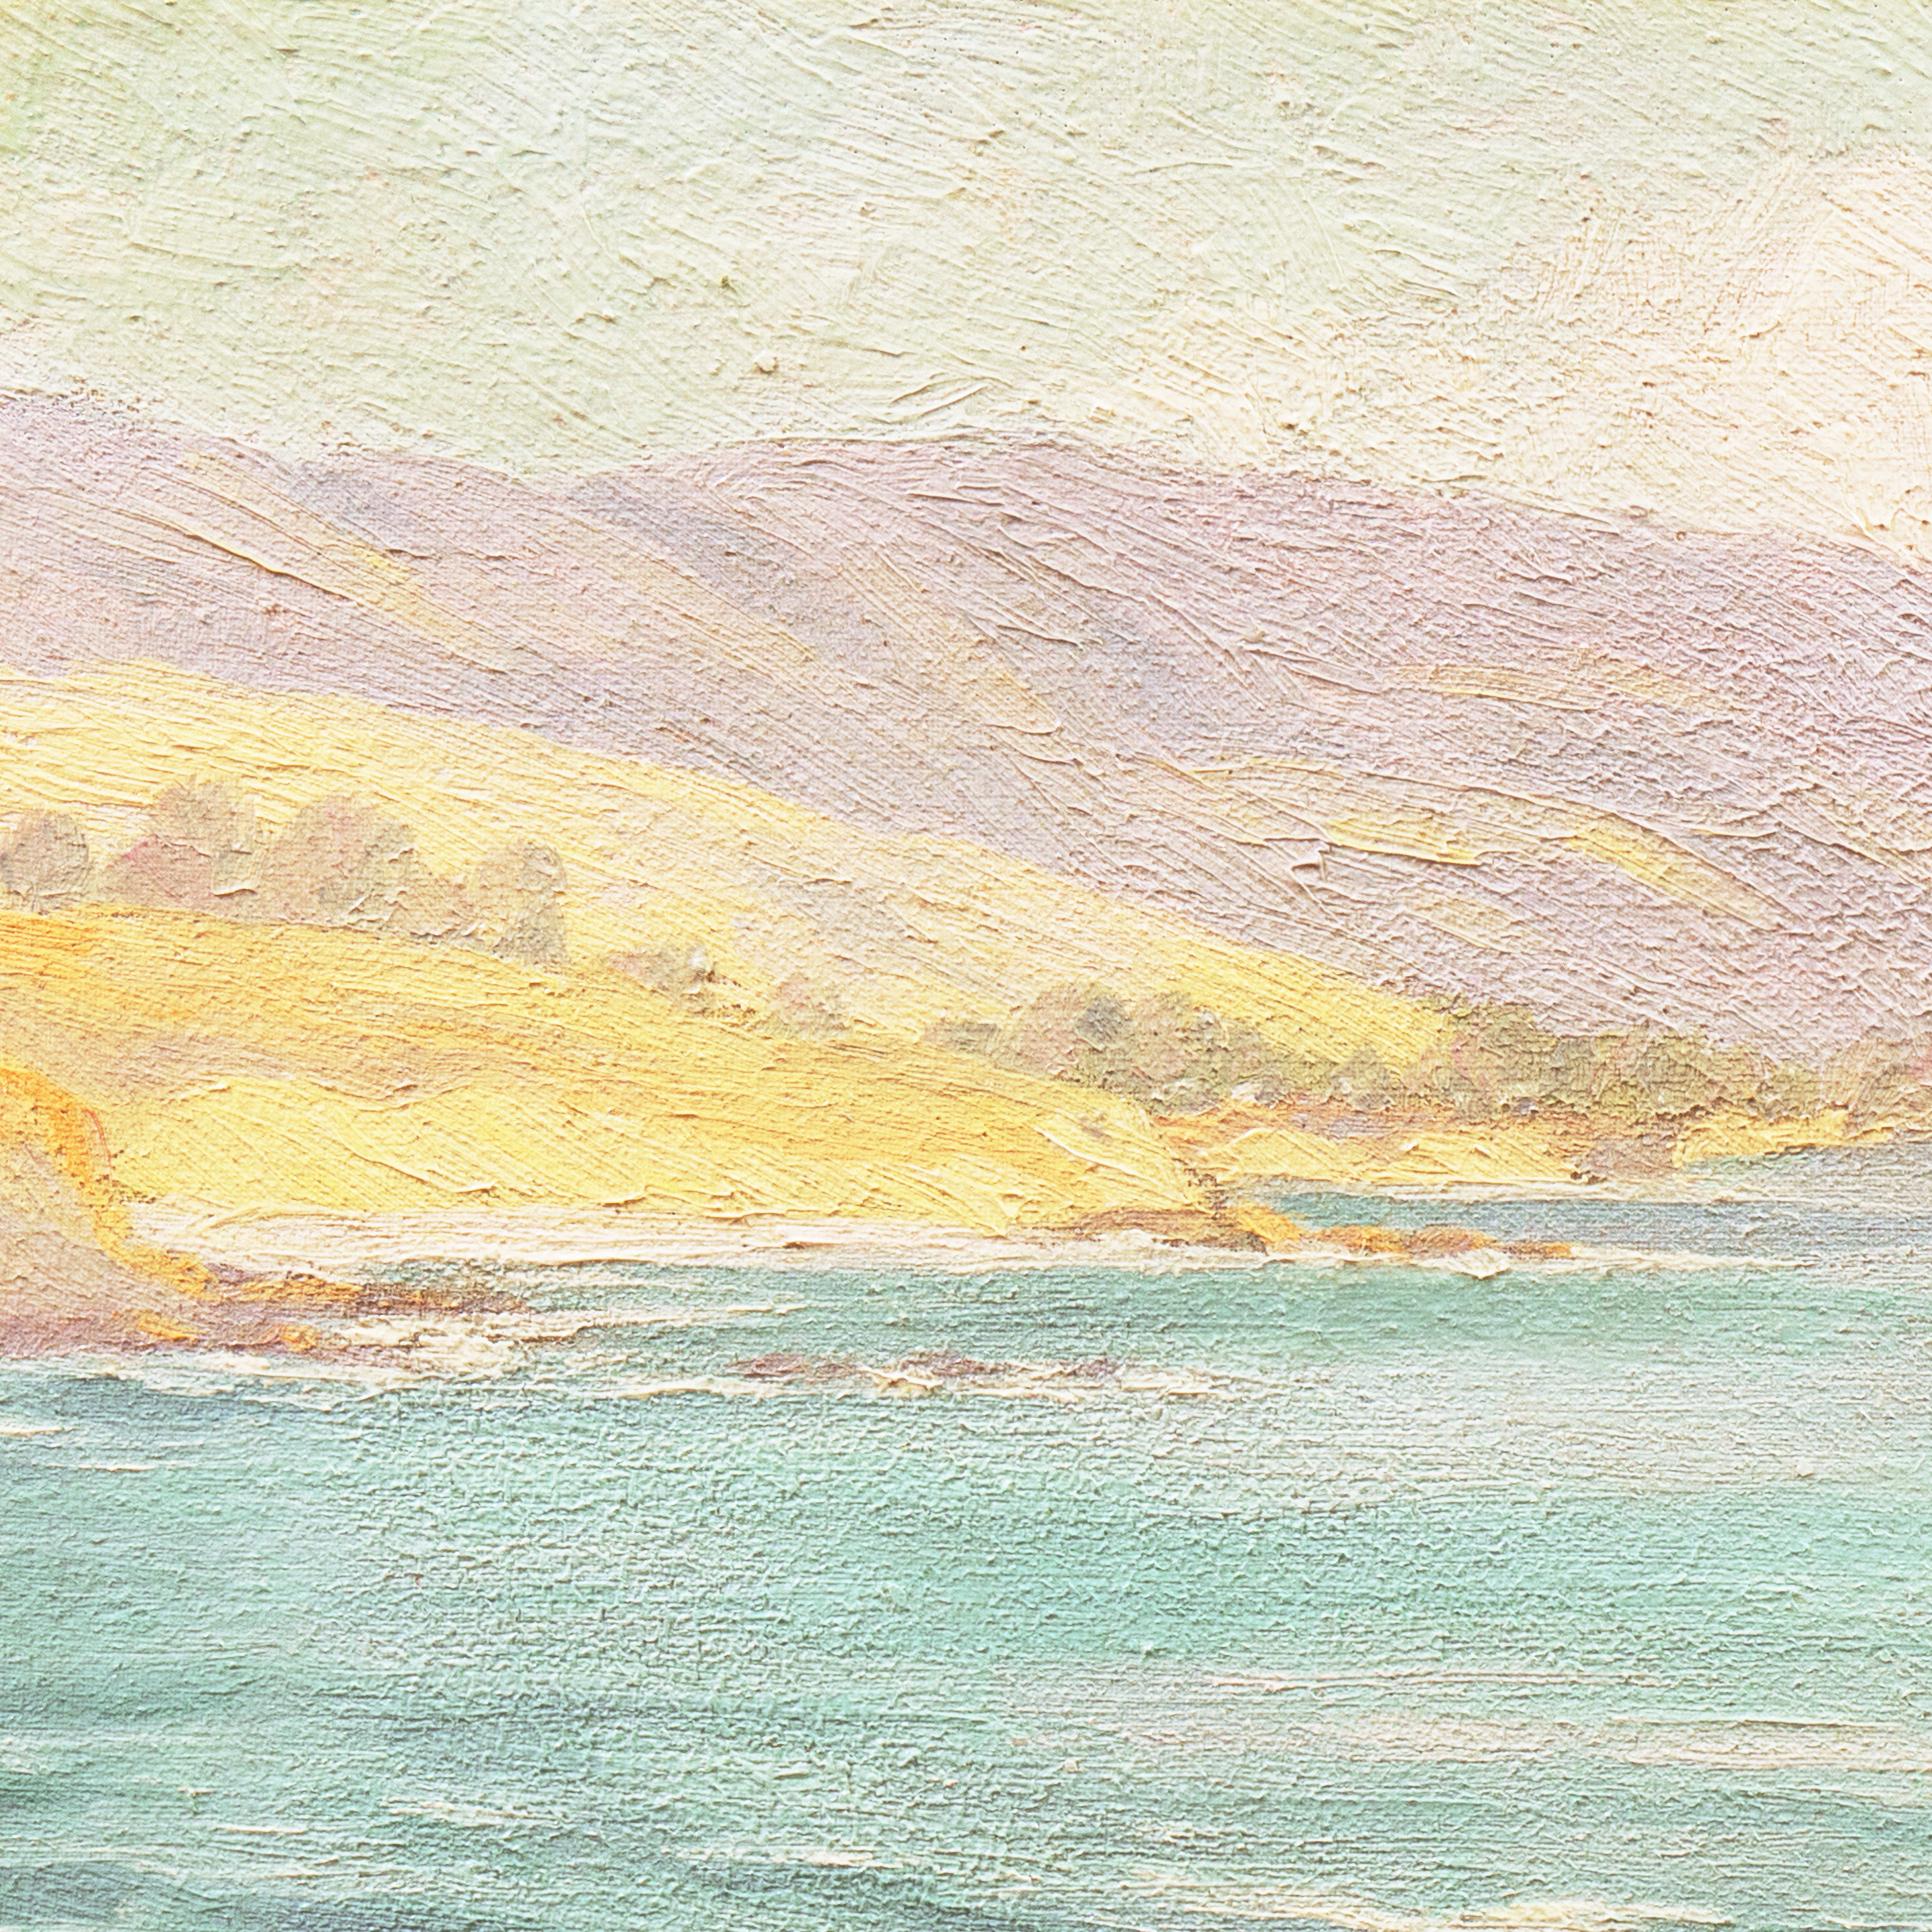  'California Headlands with a View of the Pacific', SFAA, Laguna Beach, ASL NYC 1